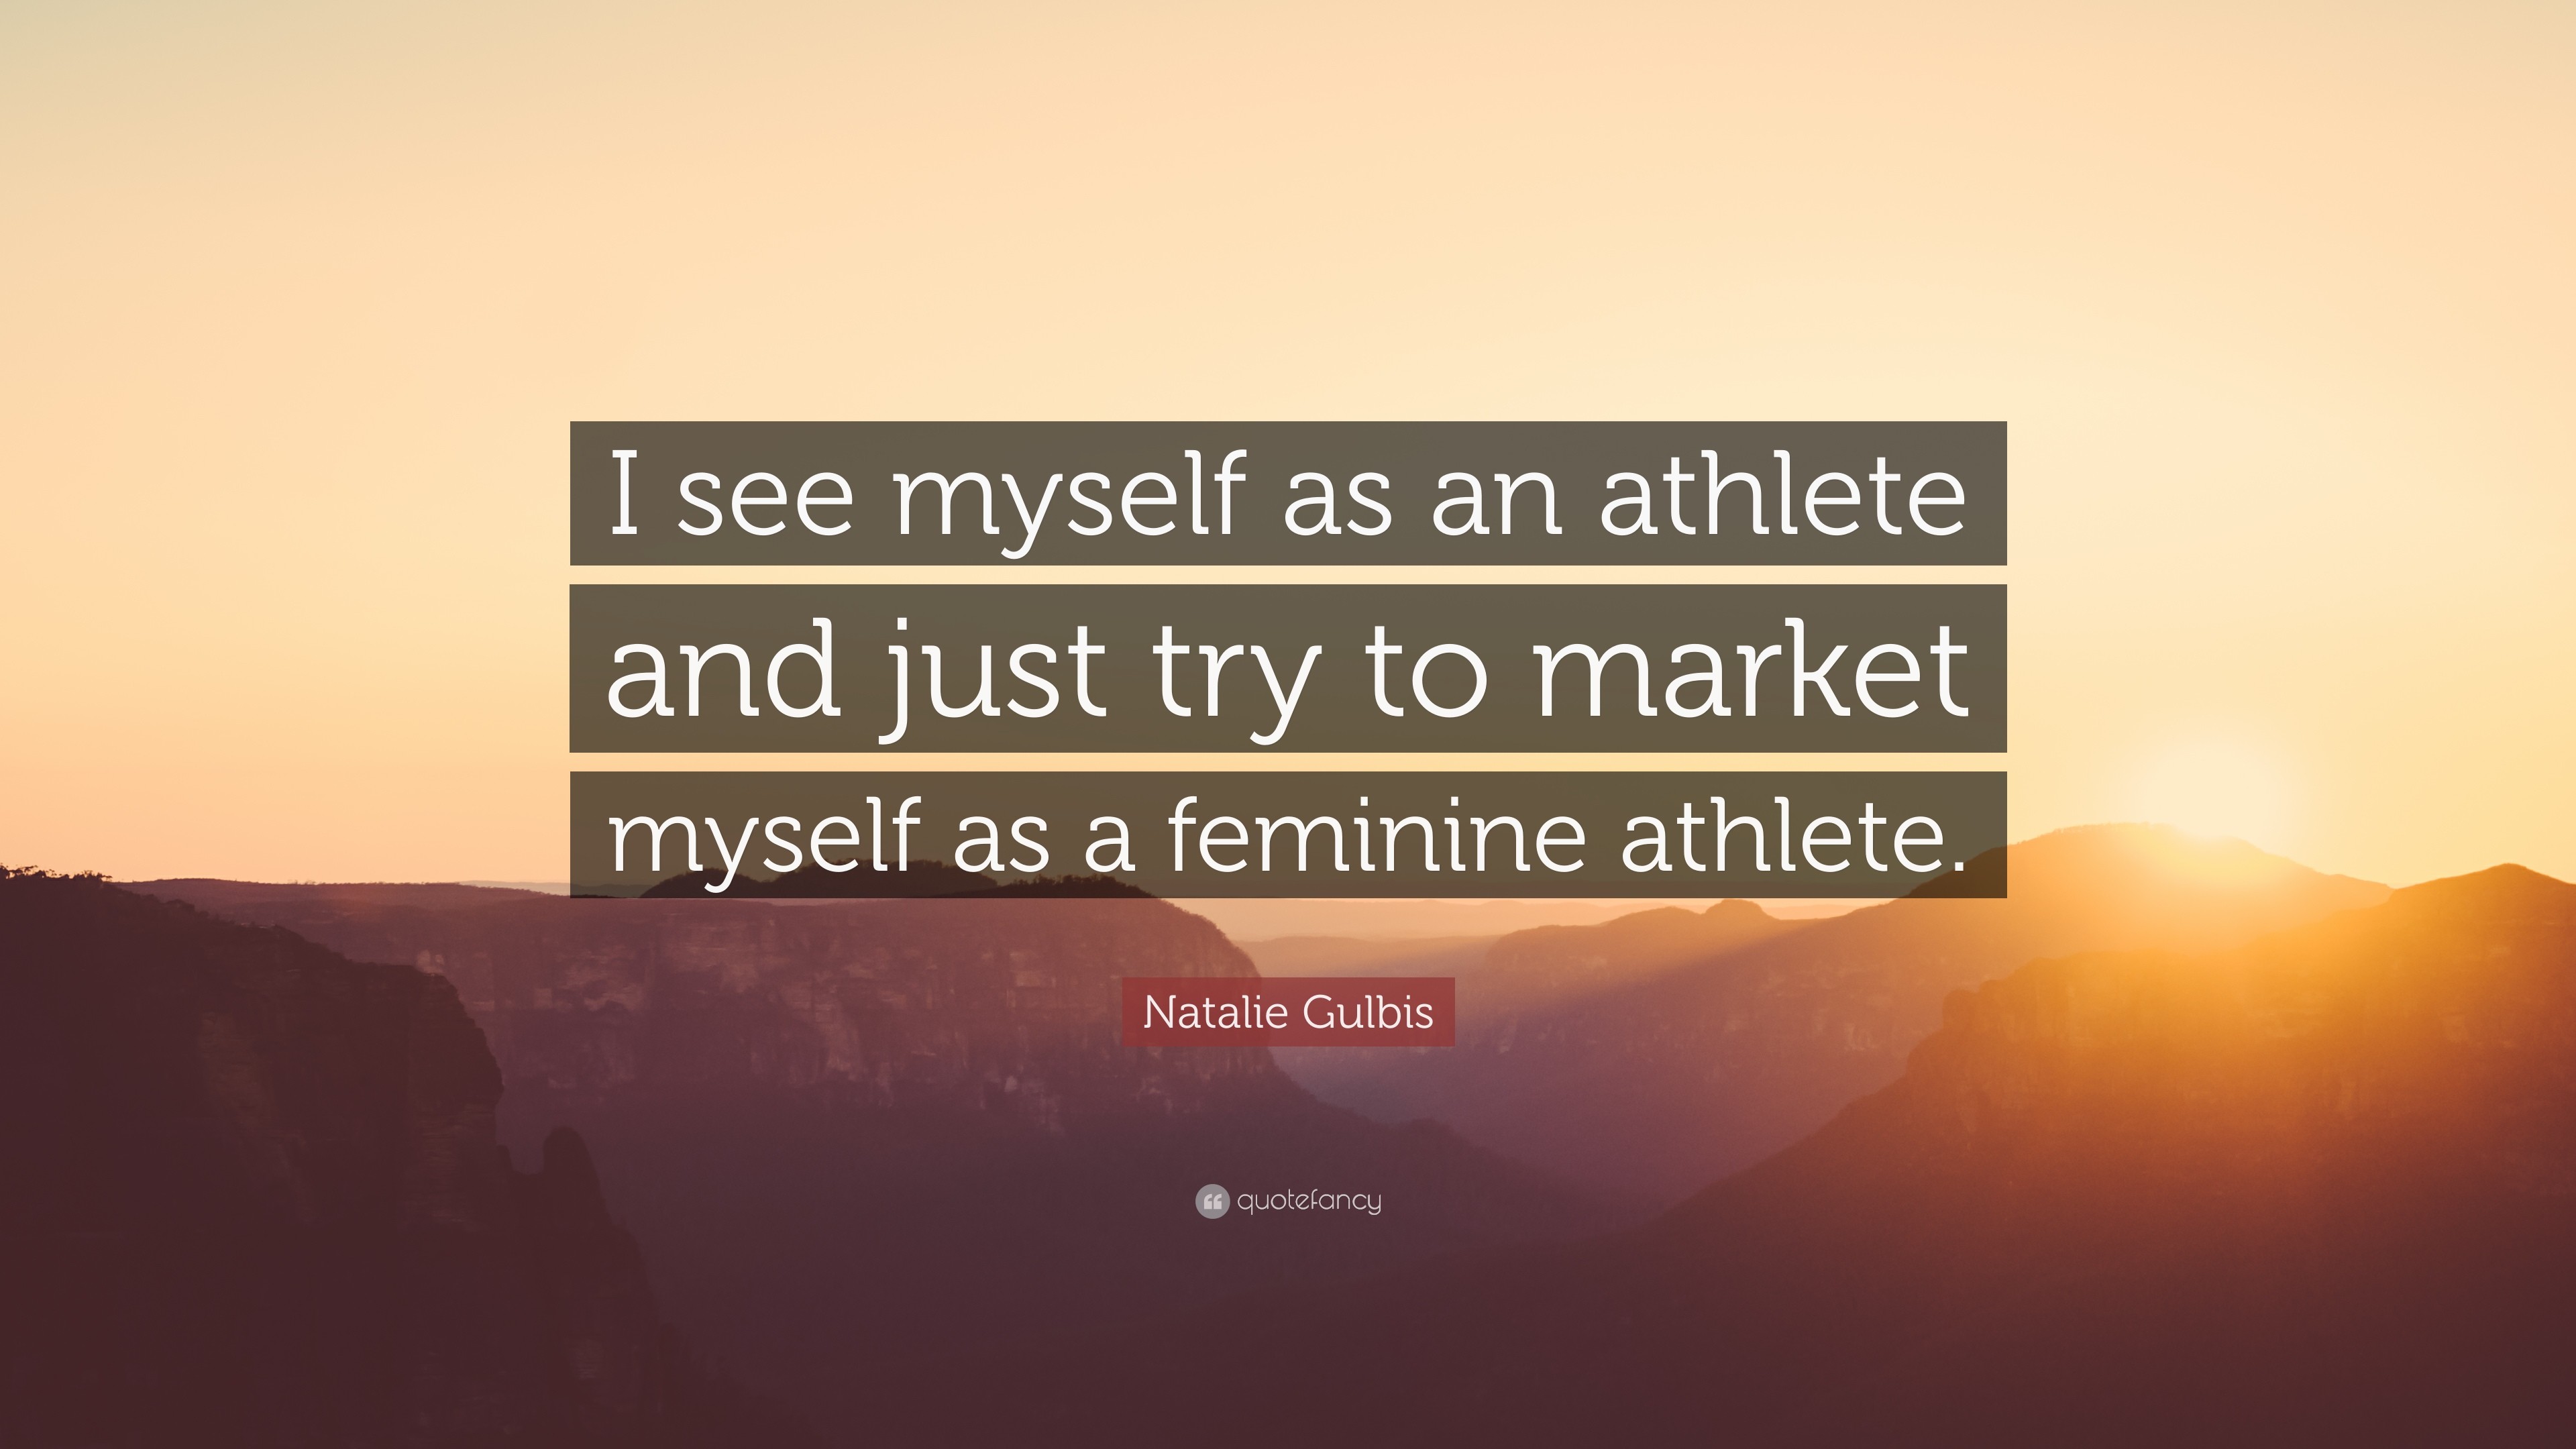 3840x2160 Natalie Gulbis Quote: “I see myself as an athlete and just try to market